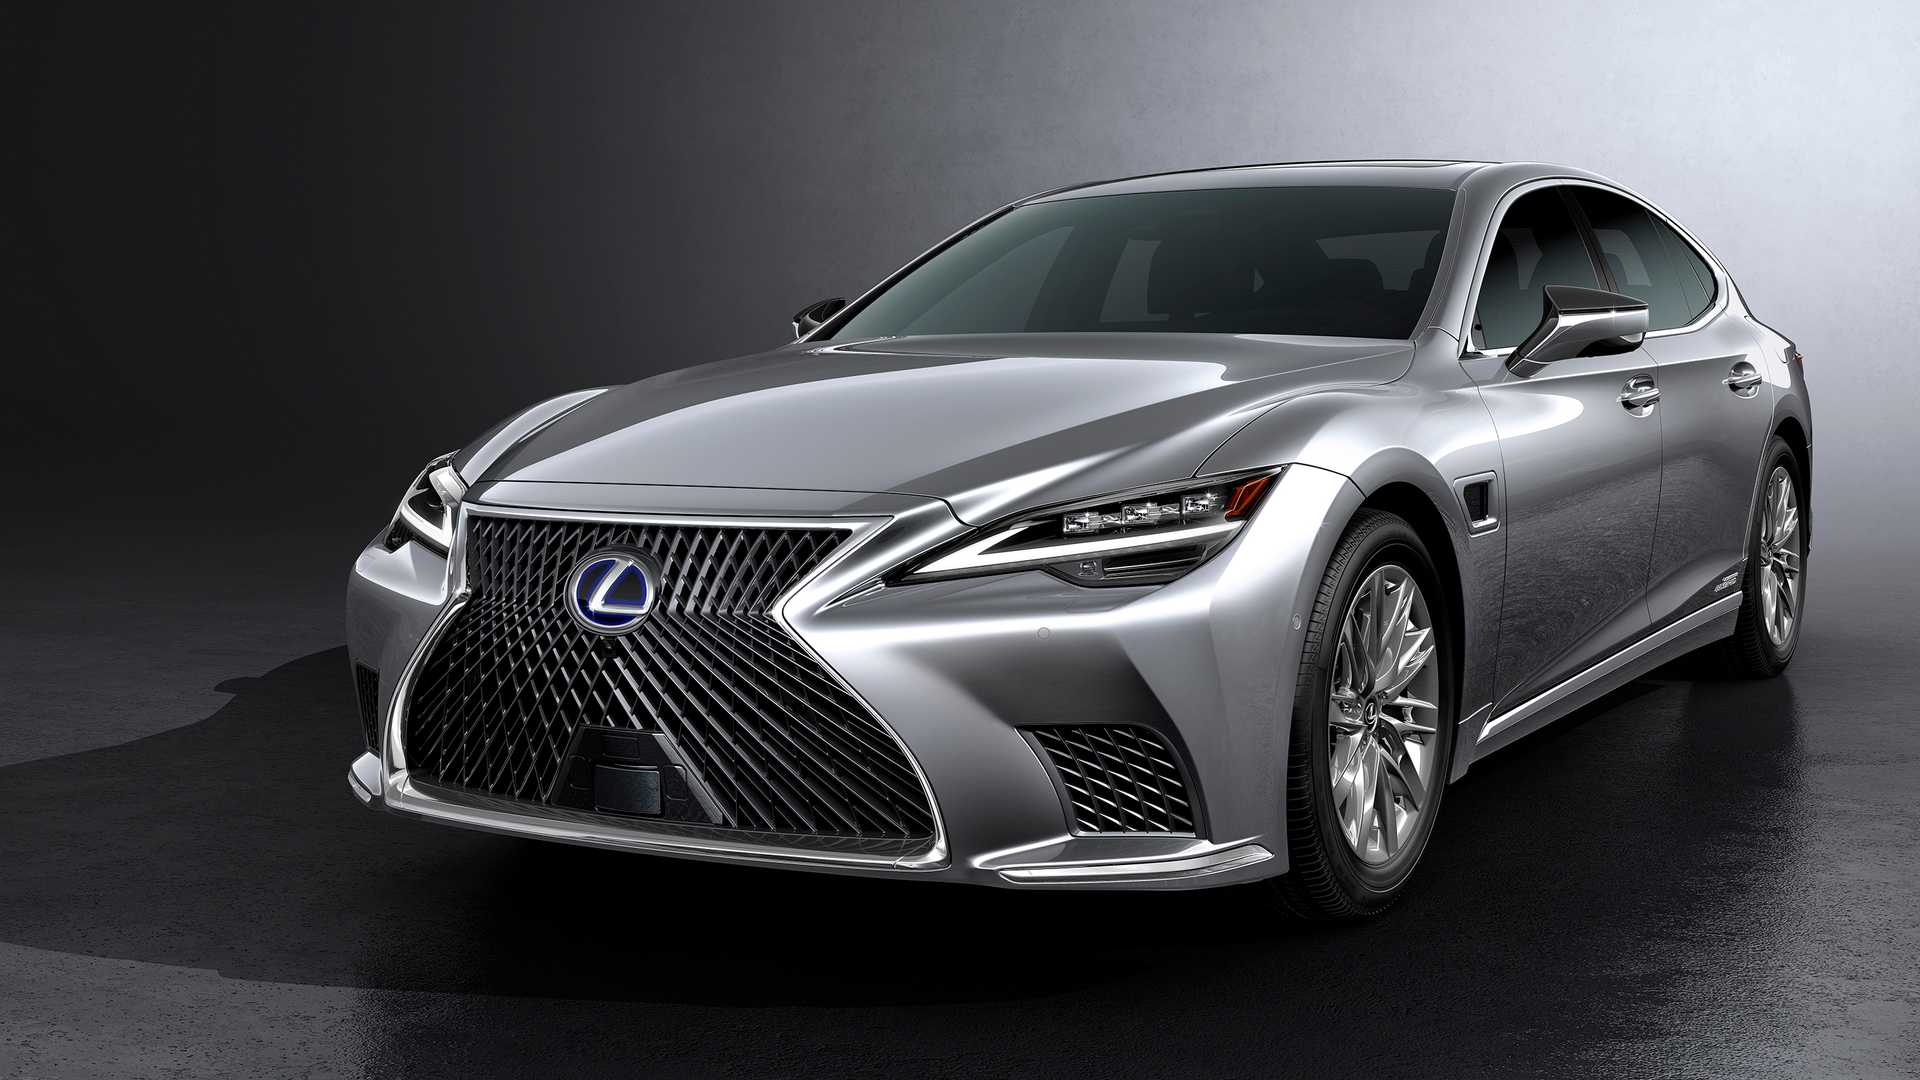 Facelifted 2021 Lexus LS Revealed With Improved Comfort & New Tech